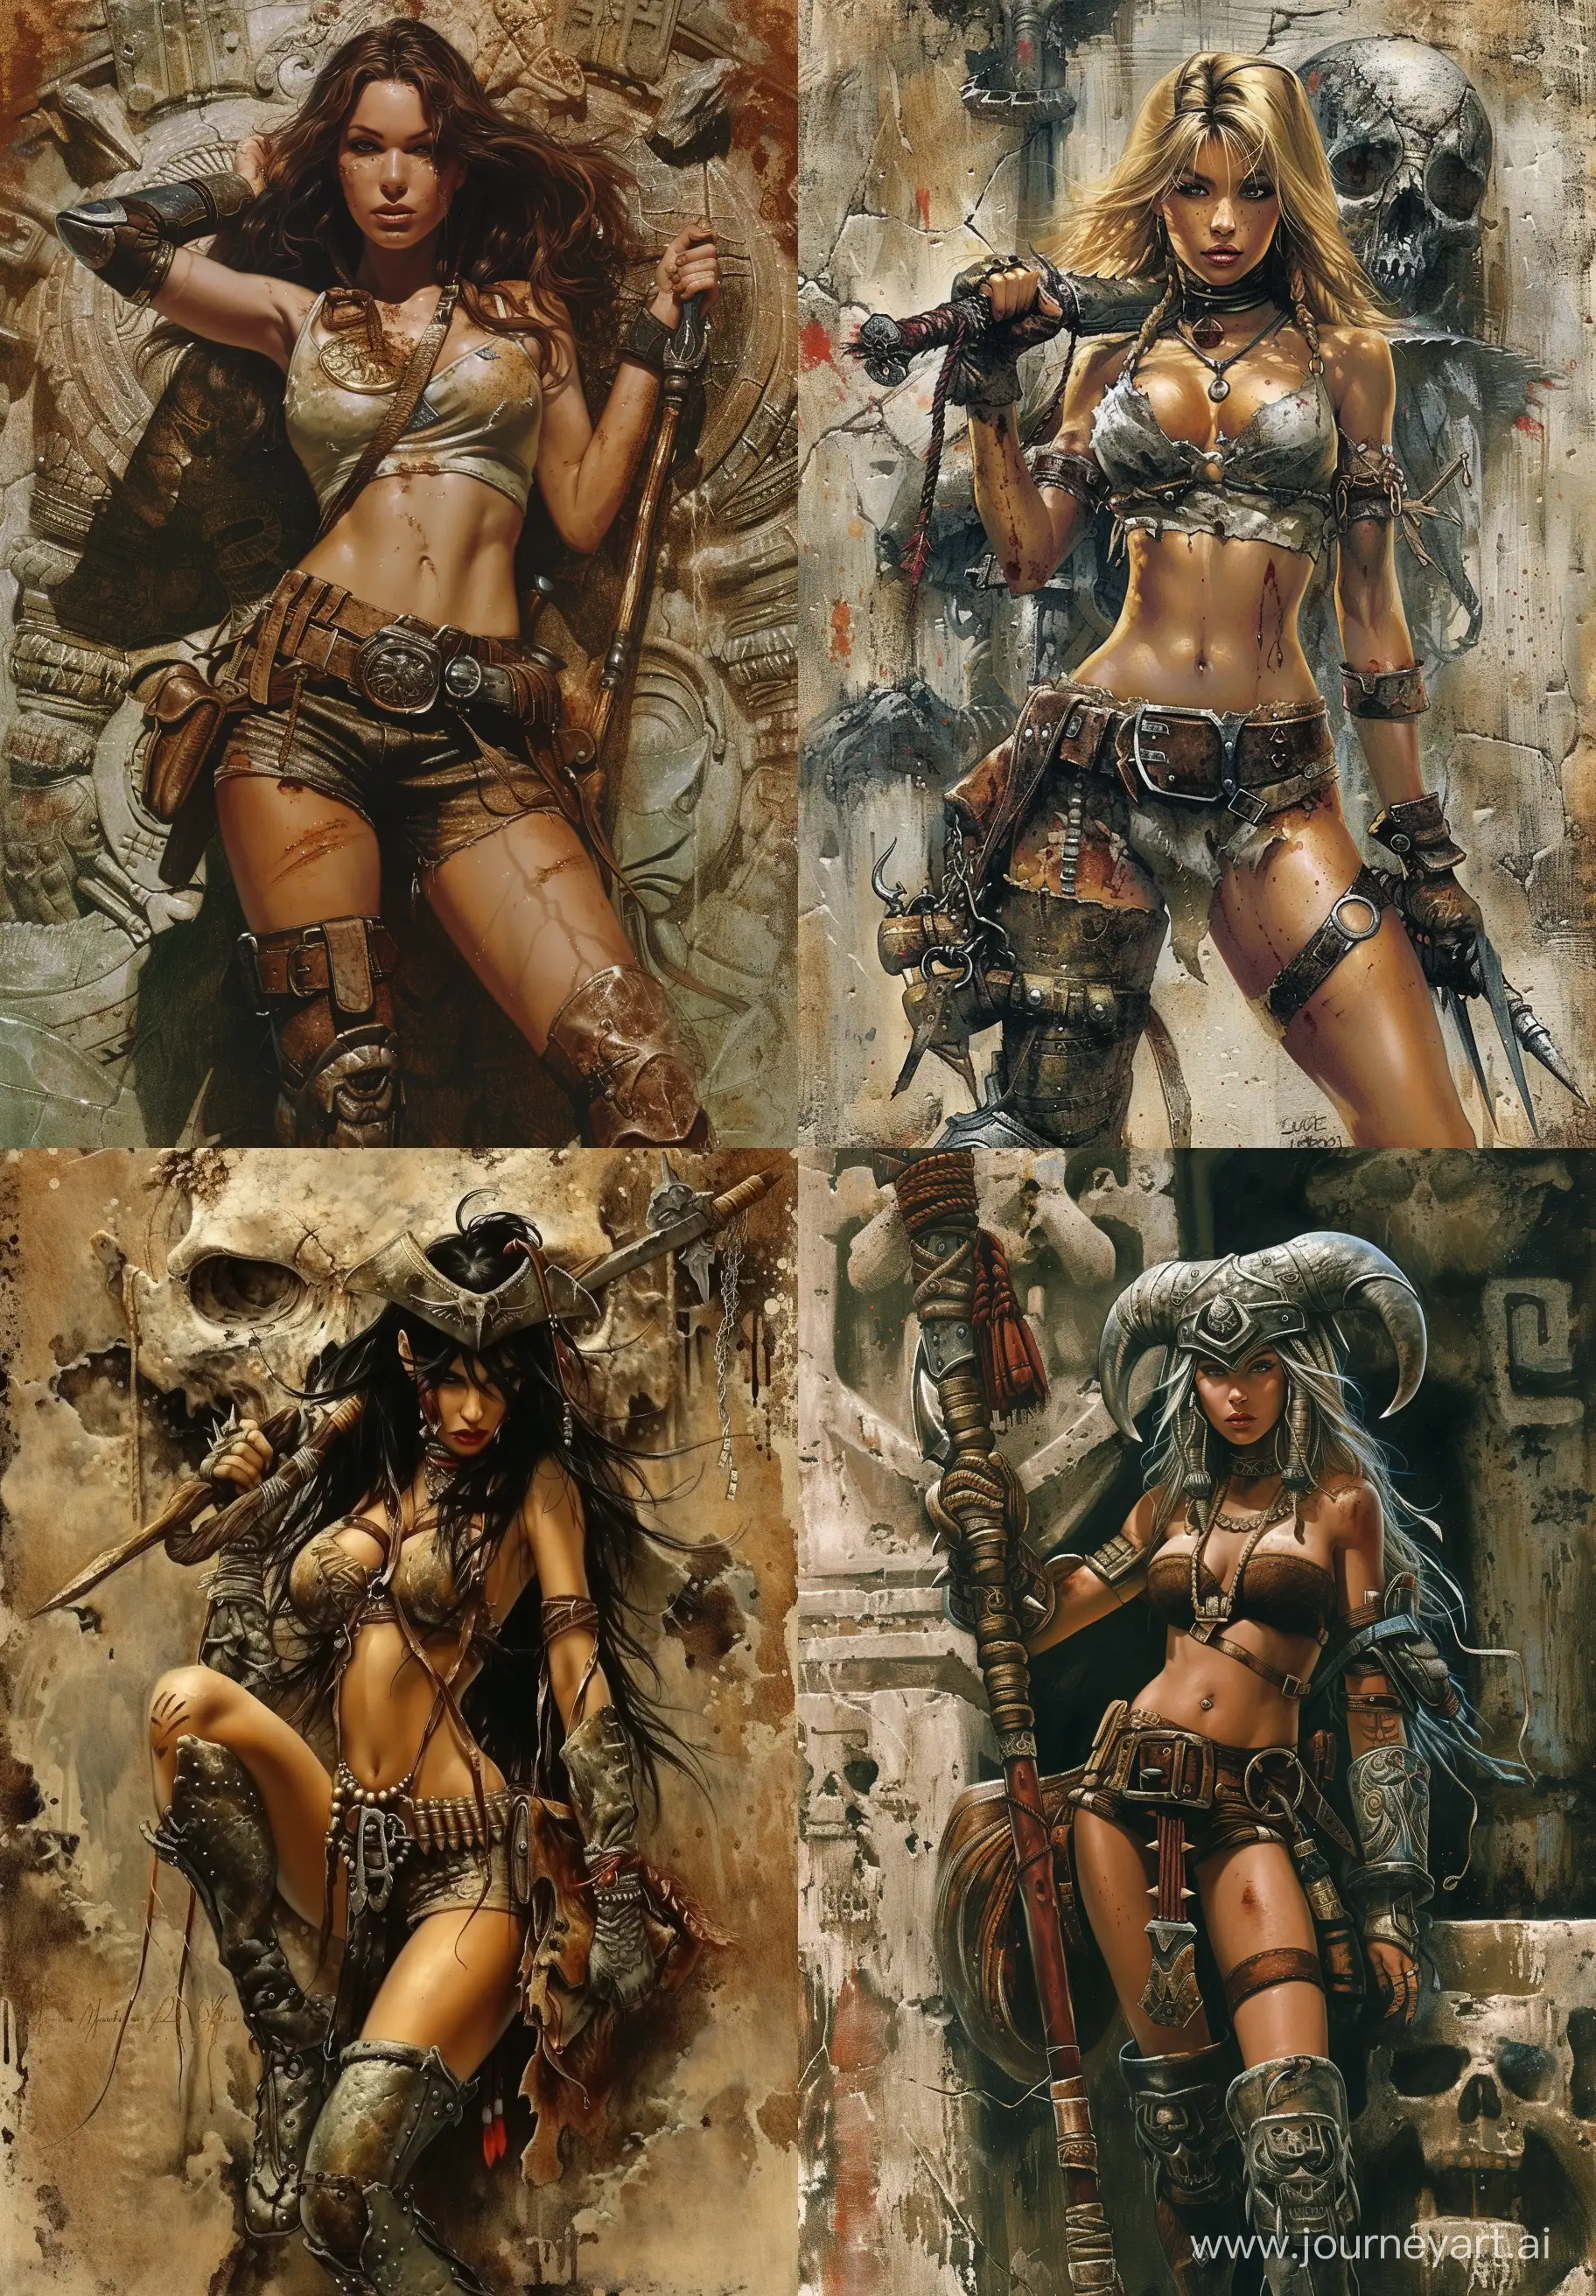 Women piratic in an exquisite costume with metal inserts resembling armor and ammunition's, a halter top, short shorts and leather high boots, holding a fighting staff over her shoulder and bags with gold money, on the back of a bone totem, Jim Lee and Luis Royo style, features, ancient, highly detailed, action poses, awesome face::2, complex, multicolor composition, X-Men comic book cover --v 6.0 --ar 9:13